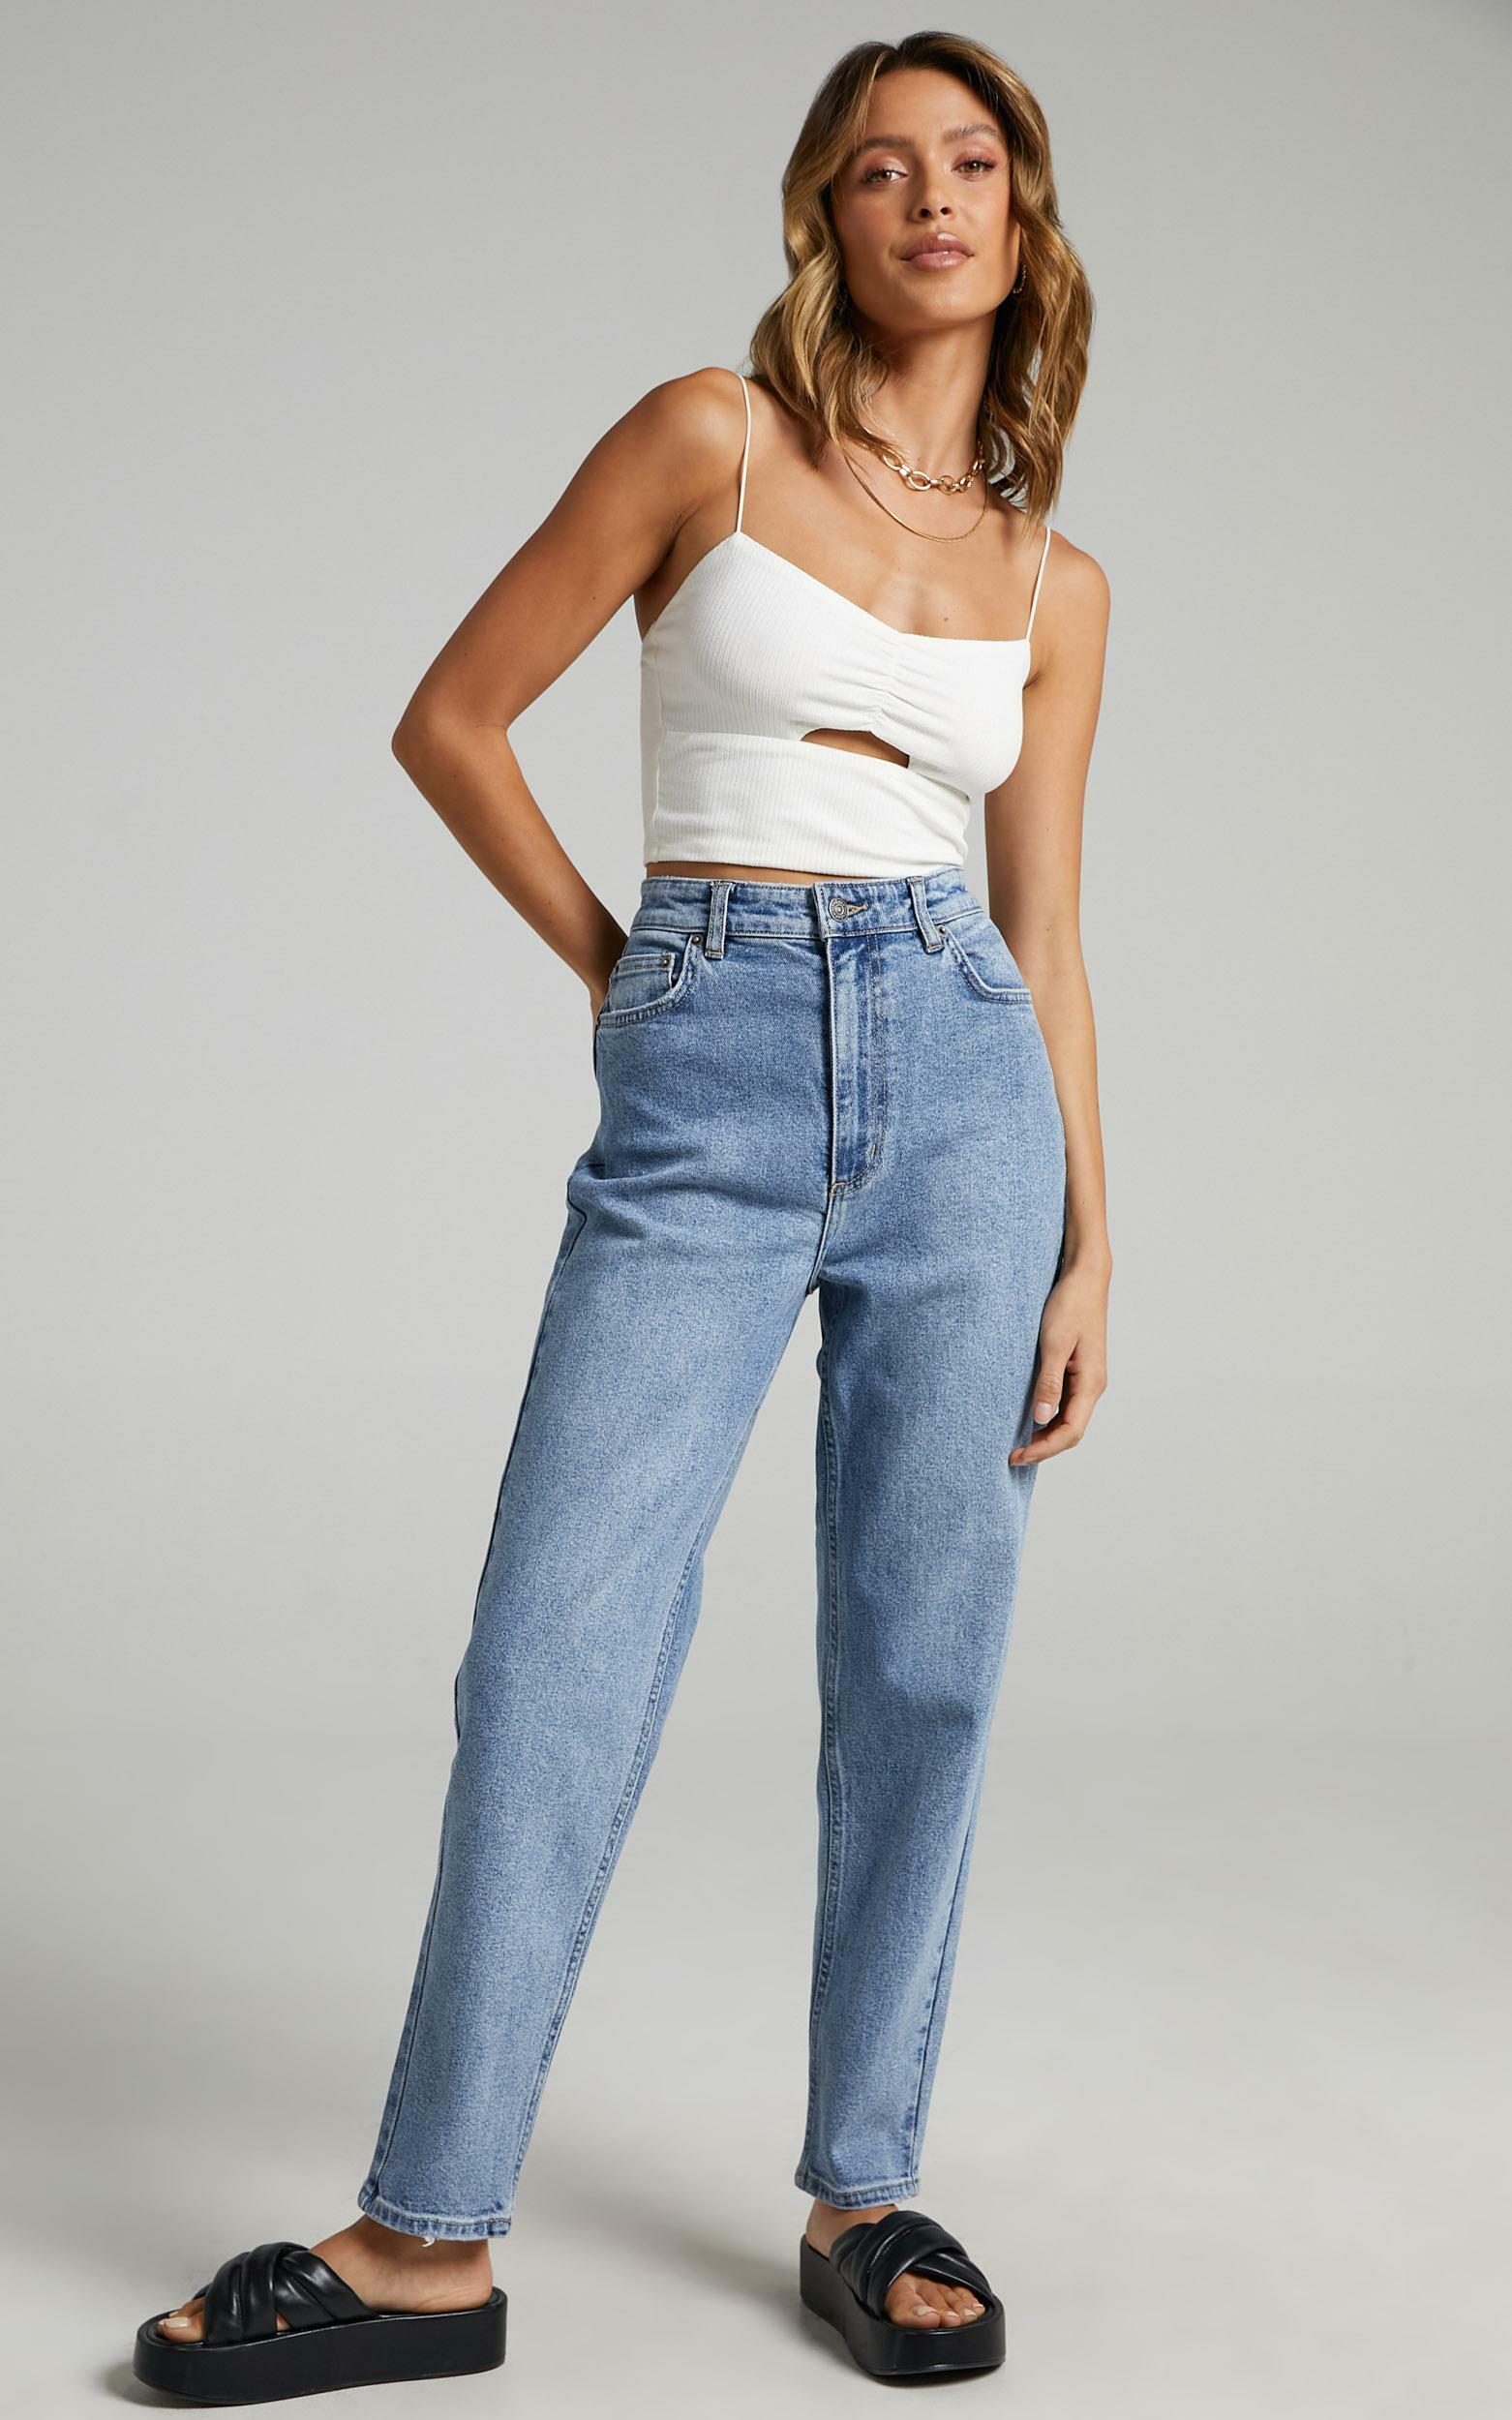 Lee - Hourglass High Mom Jeans in Bias Blue - 06, BLU1, hi-res image number null